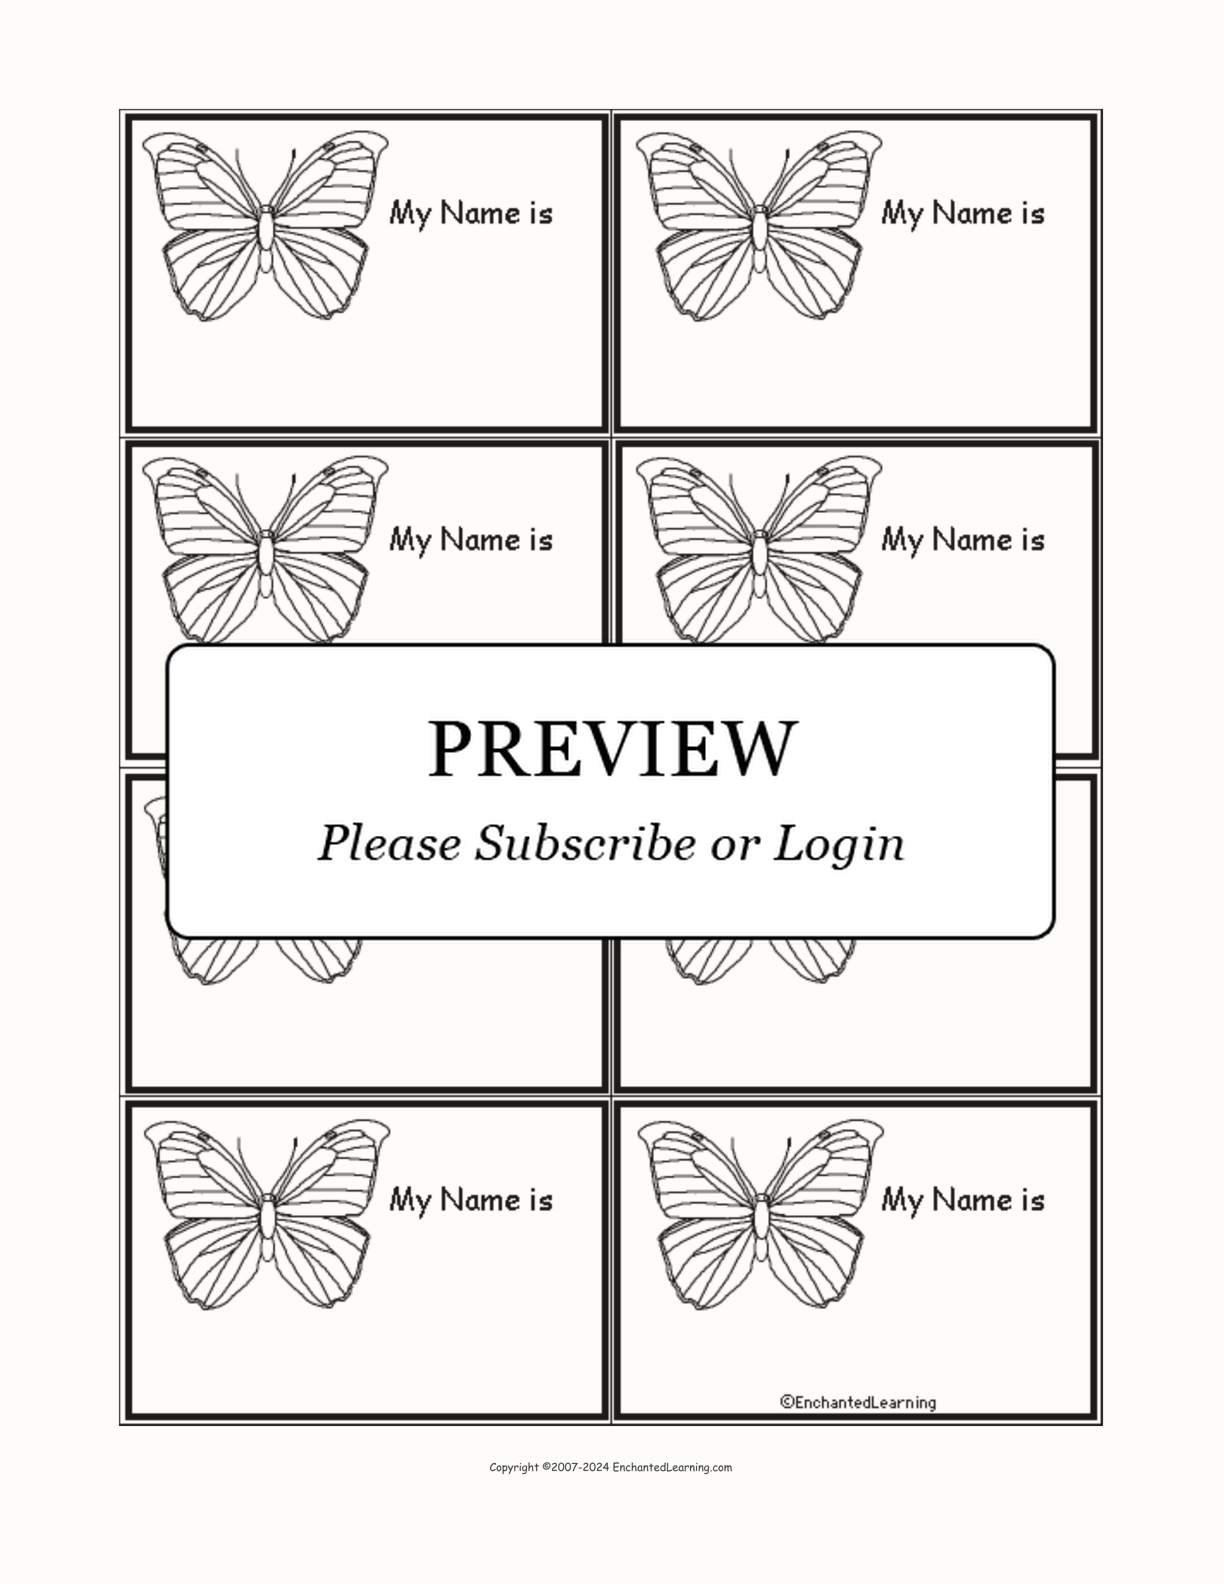 Morpho Butterfly Nametags interactive printout page 1